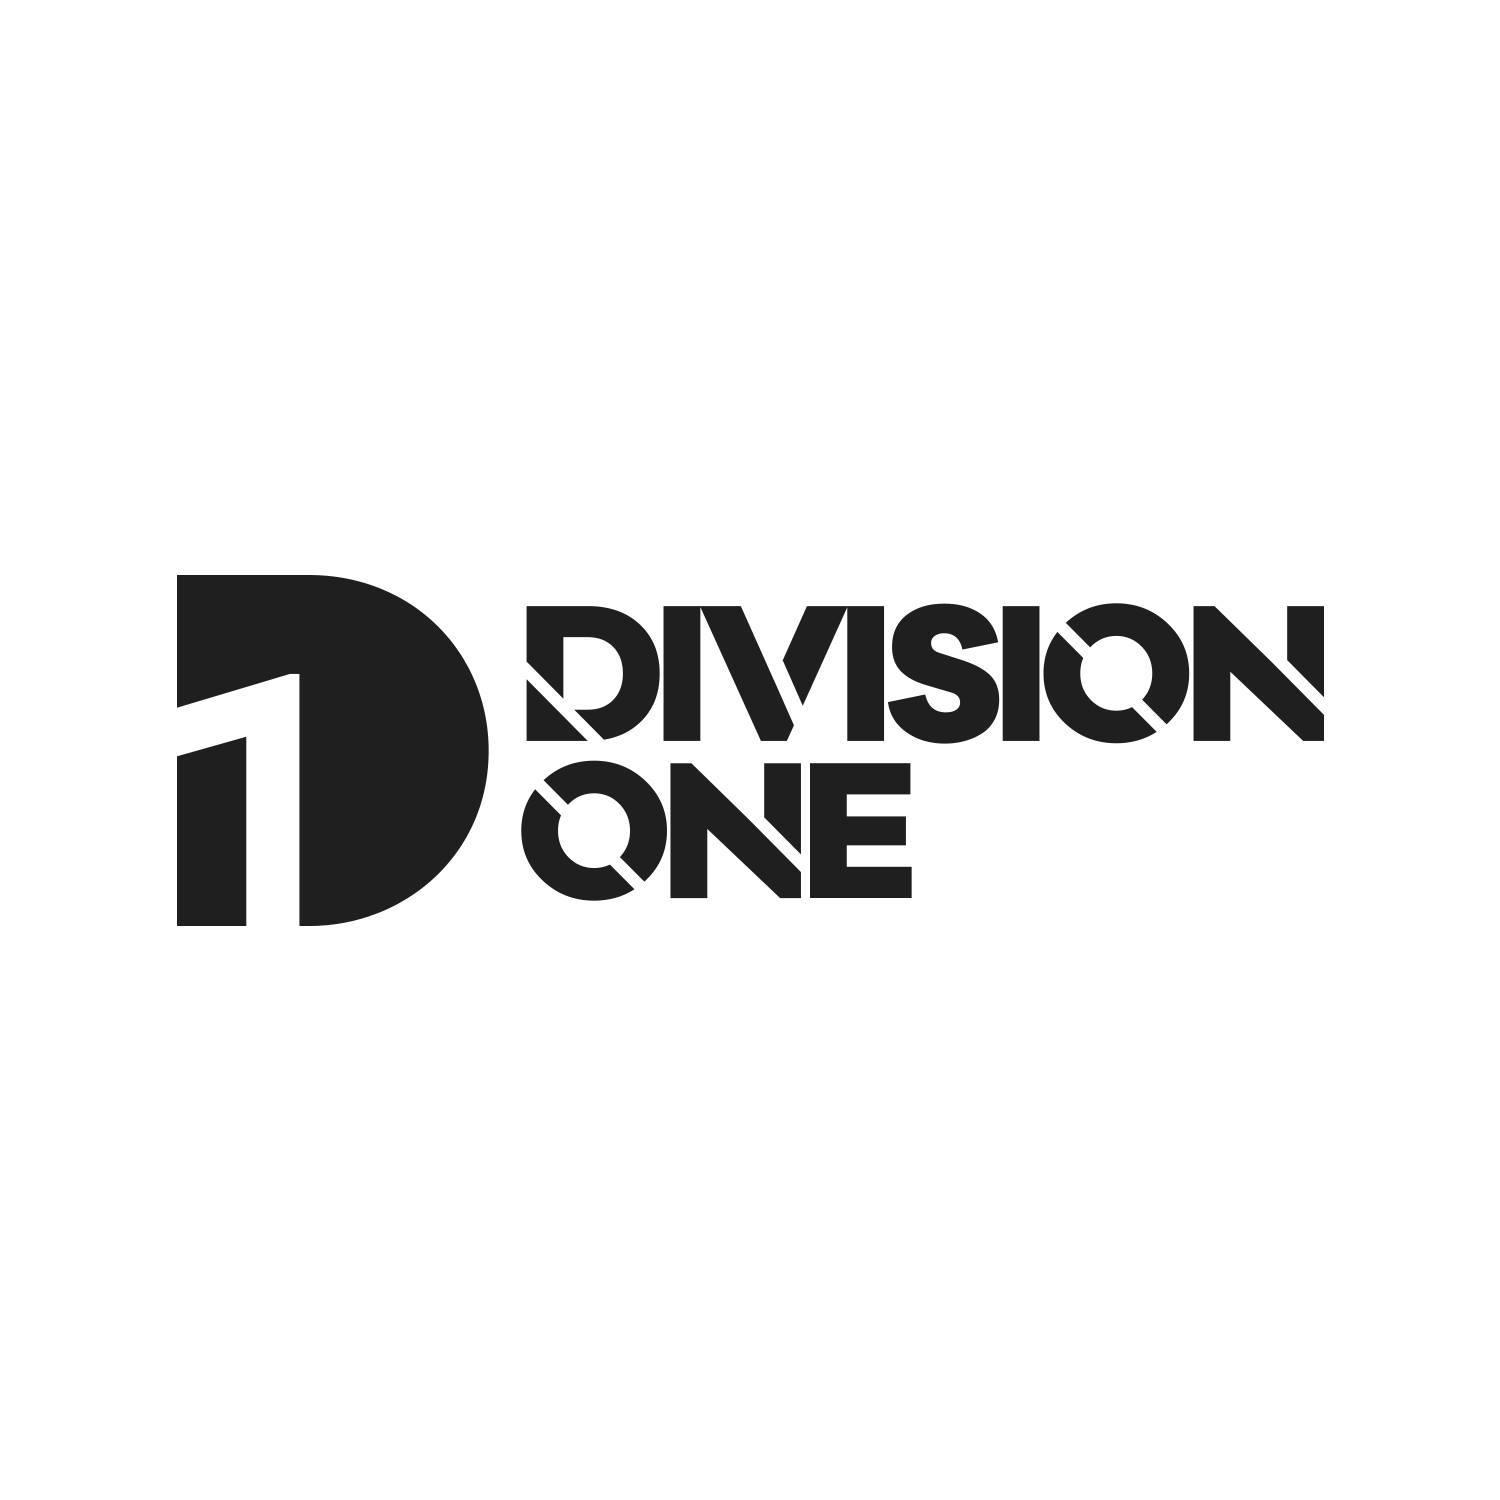 Division One